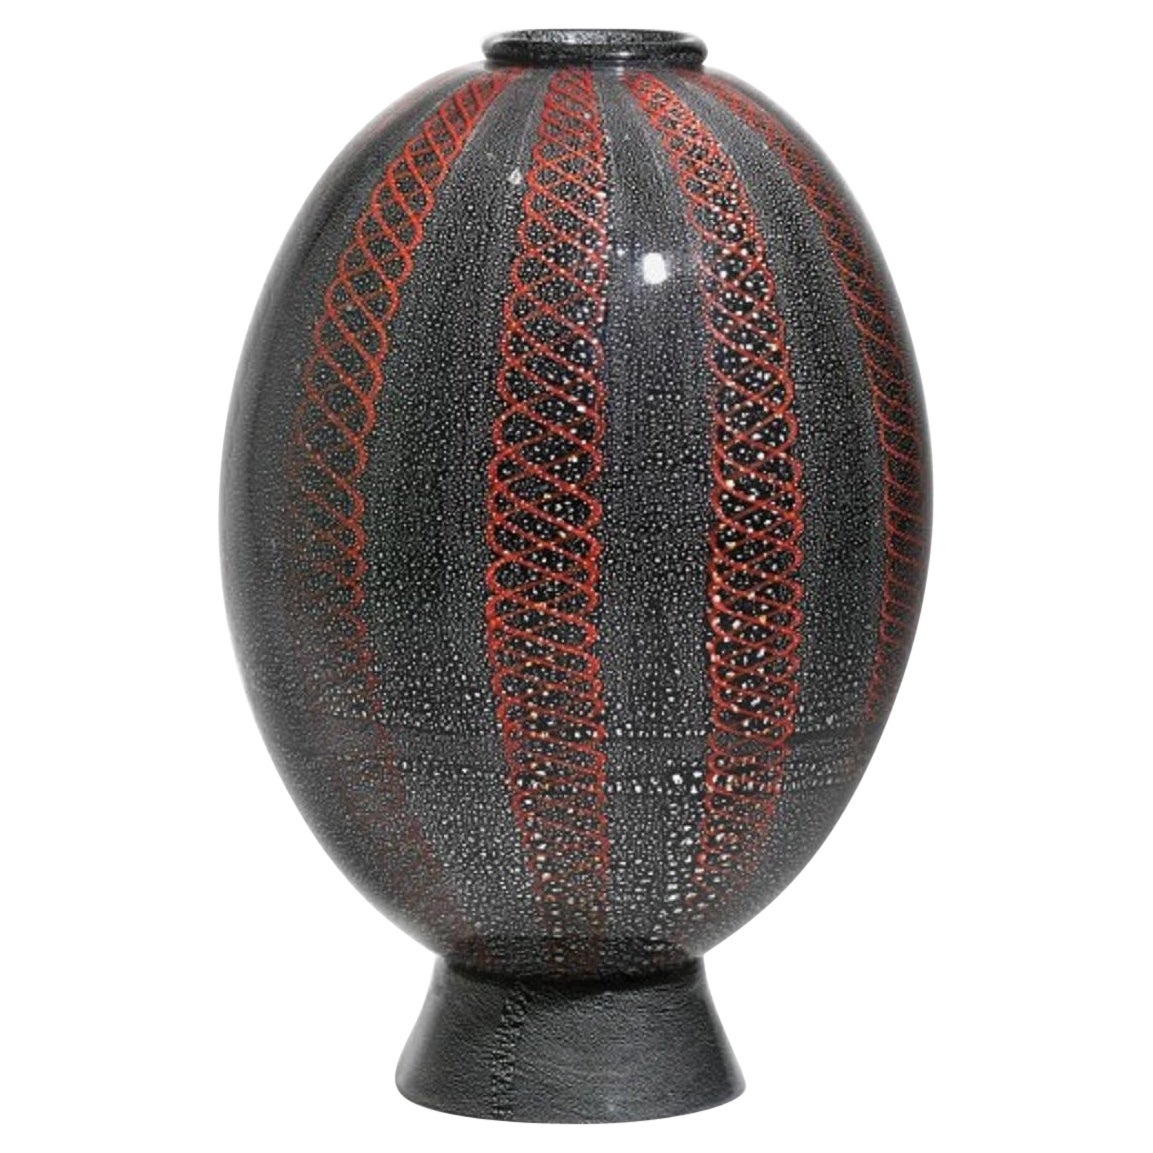 Ovoid Vase from the Neri Argento Series, Carlo Scarpa